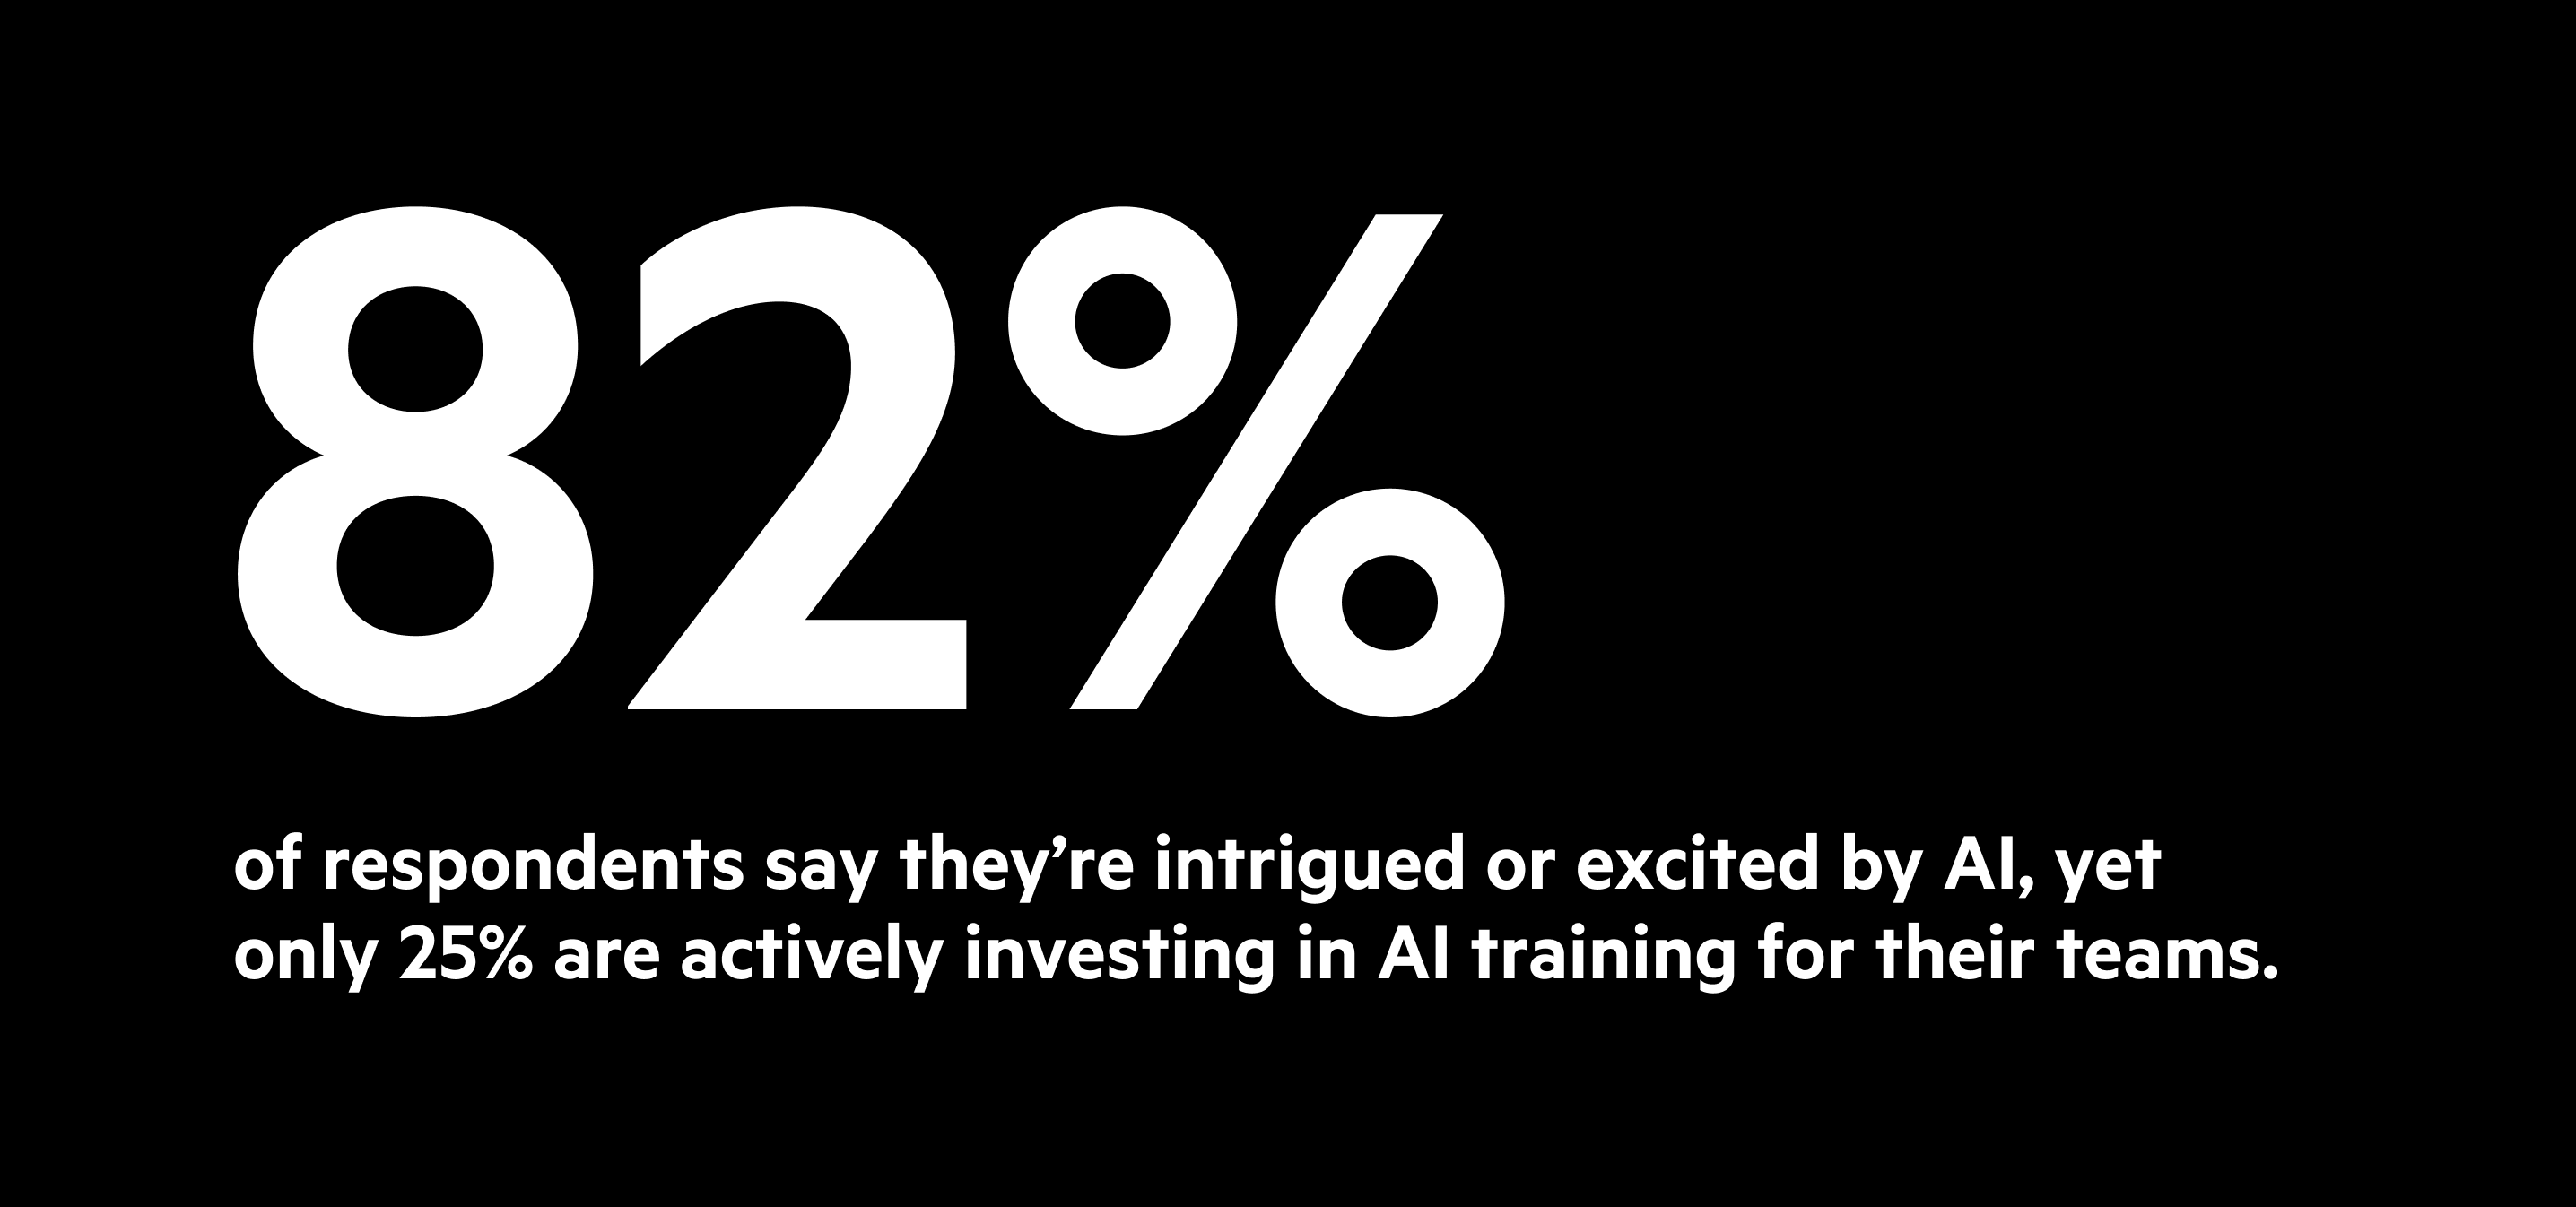 82% of accounting professionals say they're intrigued or excited by Al, yet only 25% are actively investing in Al training for their teams